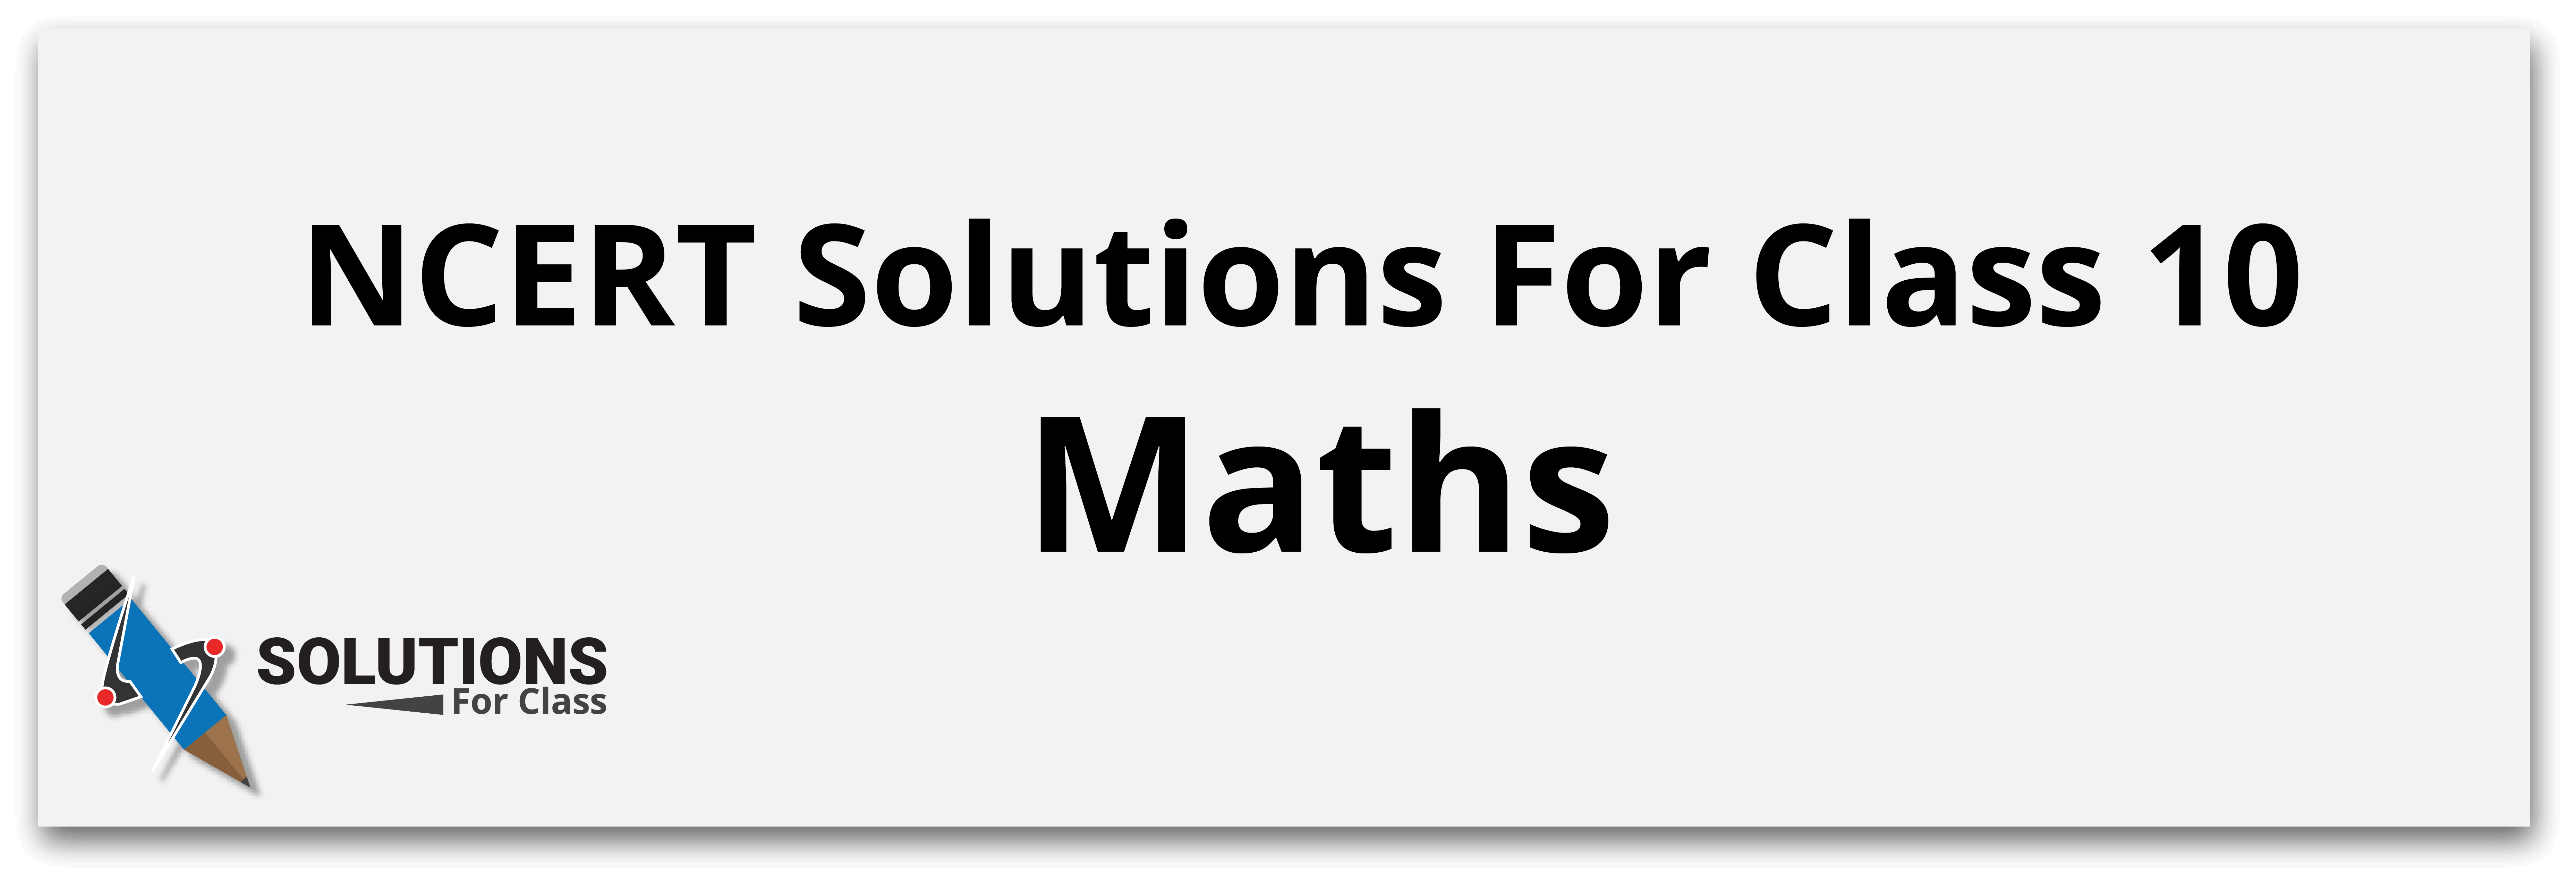 NCERT Solutions For Class 10 Maths
NCERT Solutions For Class 10 Maths are an essential study resource for students preparing for the CBSE board exams. Our solutions are designed to provide a comprehensive understanding of the mathematical concepts covered in the Class 10 syllabus.

With the these solutions, students can get step-by-step explanations to all the exercises given in the textbook. These solutions are prepared by subject matter experts who have extensive experience in teaching mathematics, ensuring that the solutions are accurate and reliable.

Here we cover all solutions for Class 10 Maths cover all the topics in the syllabus, including real numbers, polynomials, quadratic equations, trigonometry, probability, and more. The solutions are presented in an easy-to-understand manner and are written in simple language to help students grasp the concepts easily.

Furthermore, our solutions are aligned with the latest CBSE syllabus and exam pattern. This means that students can be sure that they are studying the right topics and can prepare effectively for their board exams. So, if you are a Class 10 student looking for a reliable study resource, These Solutions for Class 10 Maths is definitely worth considering.

This page provides step-by-step solutions to every question. Using these solutions will give students a clear understanding of how to solve problems and improve their skills. The NCERT Solutions for Class 10 Maths are an effective tool to help students grasp fundamental concepts quickly and efficiently.

By practicing these solutions, students can score well in the CBSE board examination. The chapter-wise links given below make it easy for students to navigate to the relevant chapter and practice the solutions at their own pace. So, start using the NCERT Solutions for Class 10 Maths and strengthen your mathematics skills.

Here, we provide the names of each chapter and their corresponding solutions effectively, allowing students to navigate to the chapters they need to study.

NCERT Solutions For Class 10 Maths